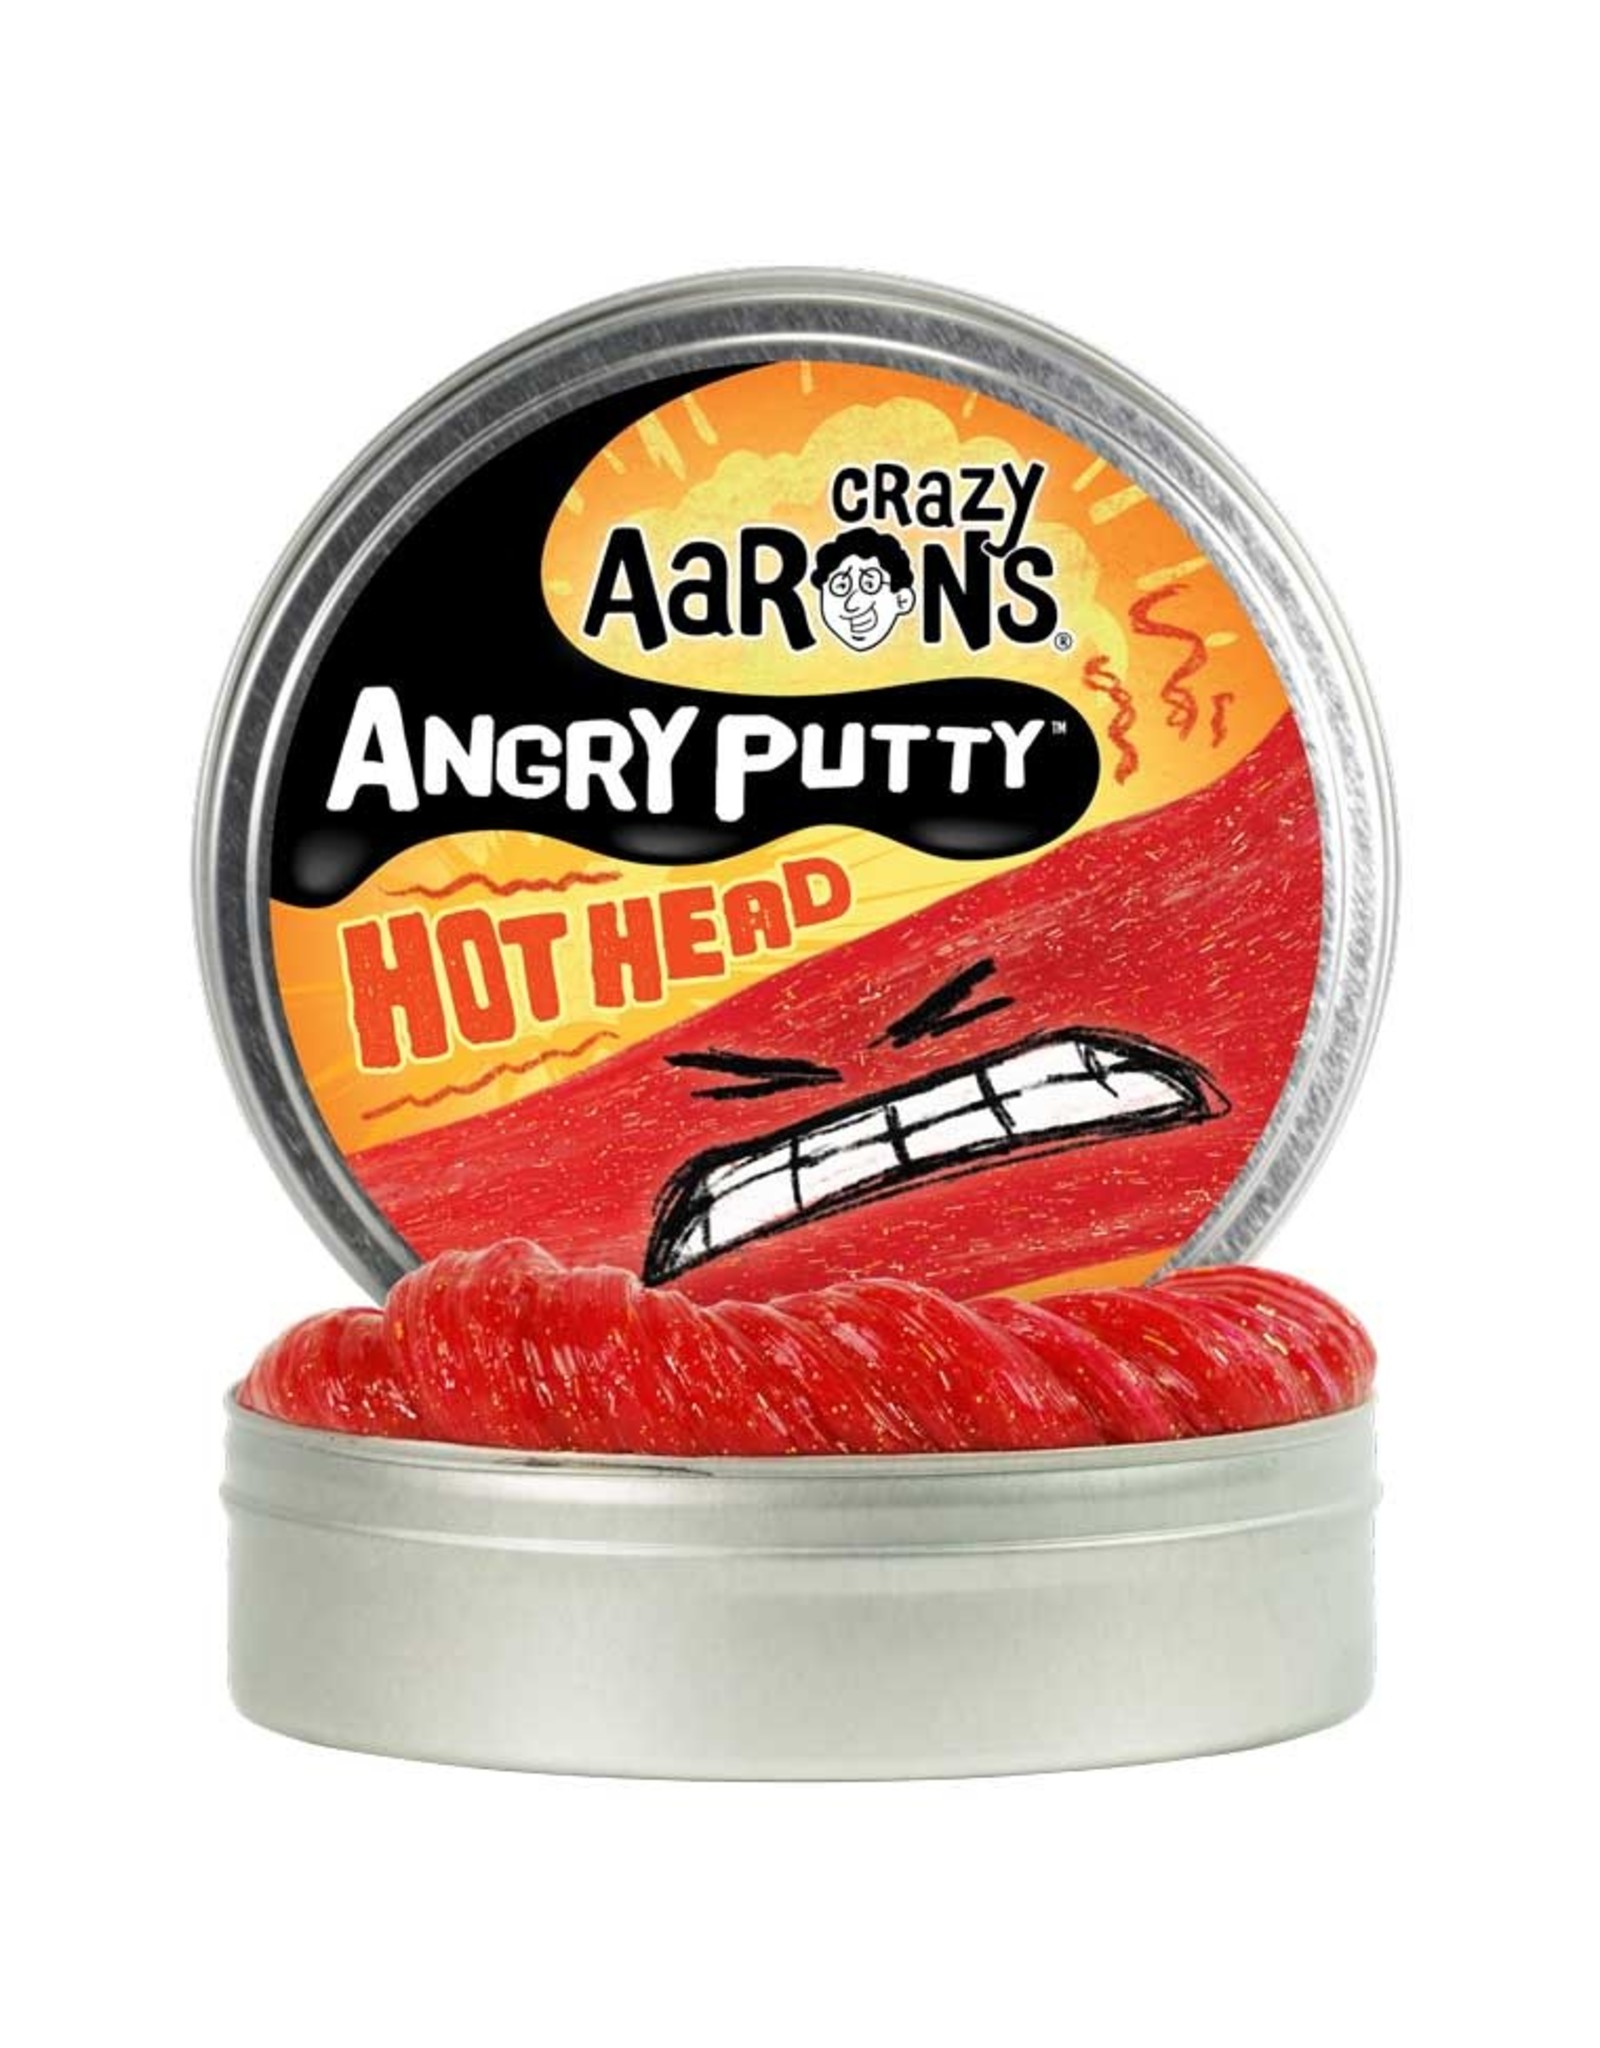 Crazy Aaron's Angry Putty - Hot Head